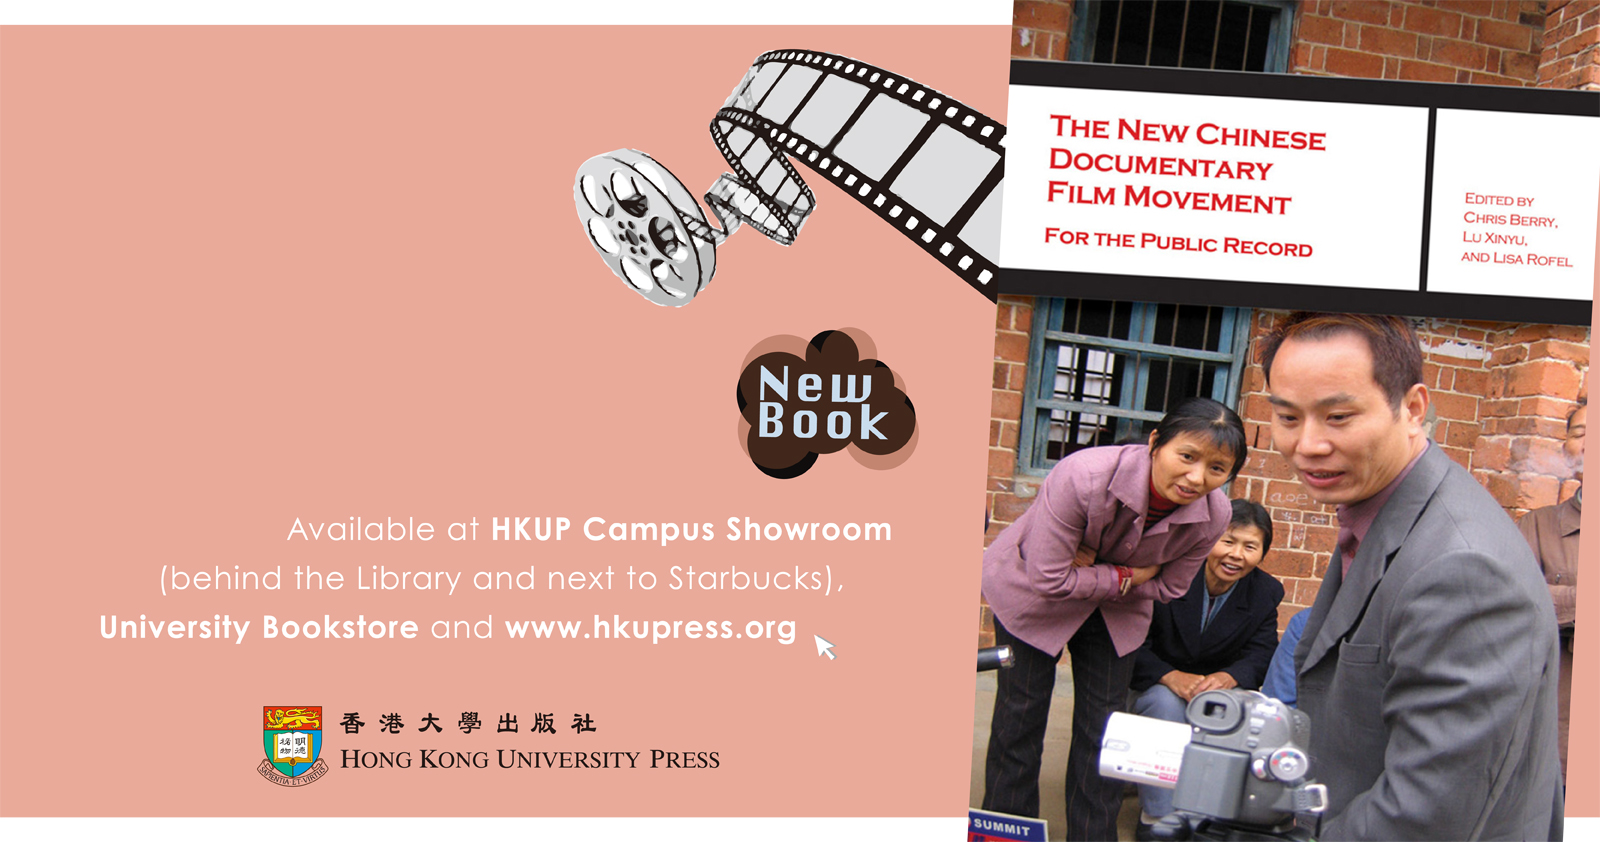 HKU Press New Book - The New Chinese Documentary Film Movement